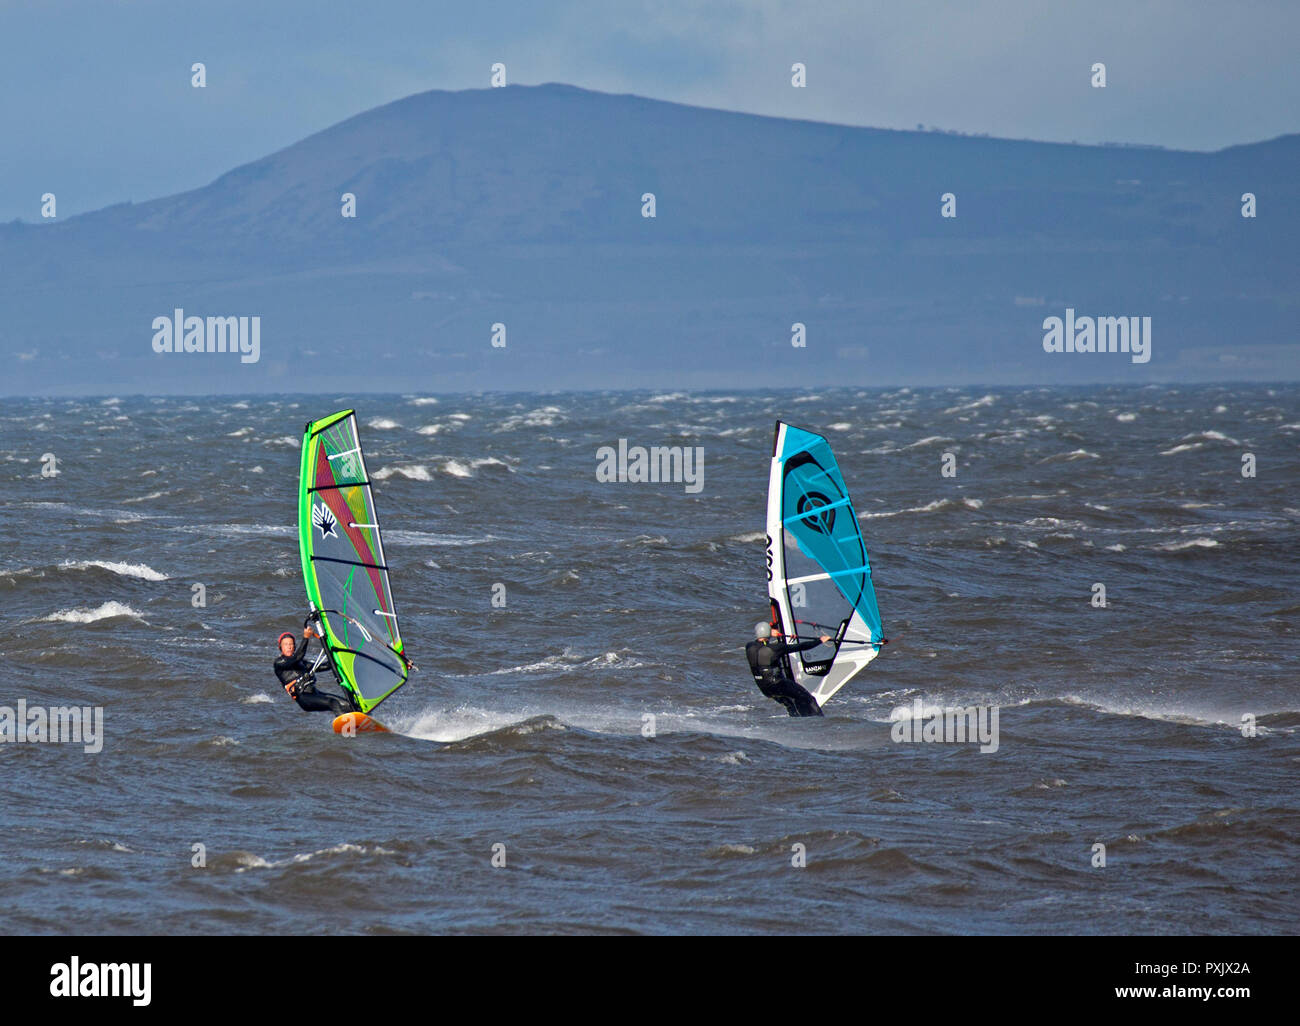 Gullane, East Lothian, Scotland, UK, 23 Oct. 2018 UK weather, 14 degrees with sunshine and winds of 44km/h and gusts of 57 km/h, windsurfers were taking advantage of the windy conditions Stock Photo